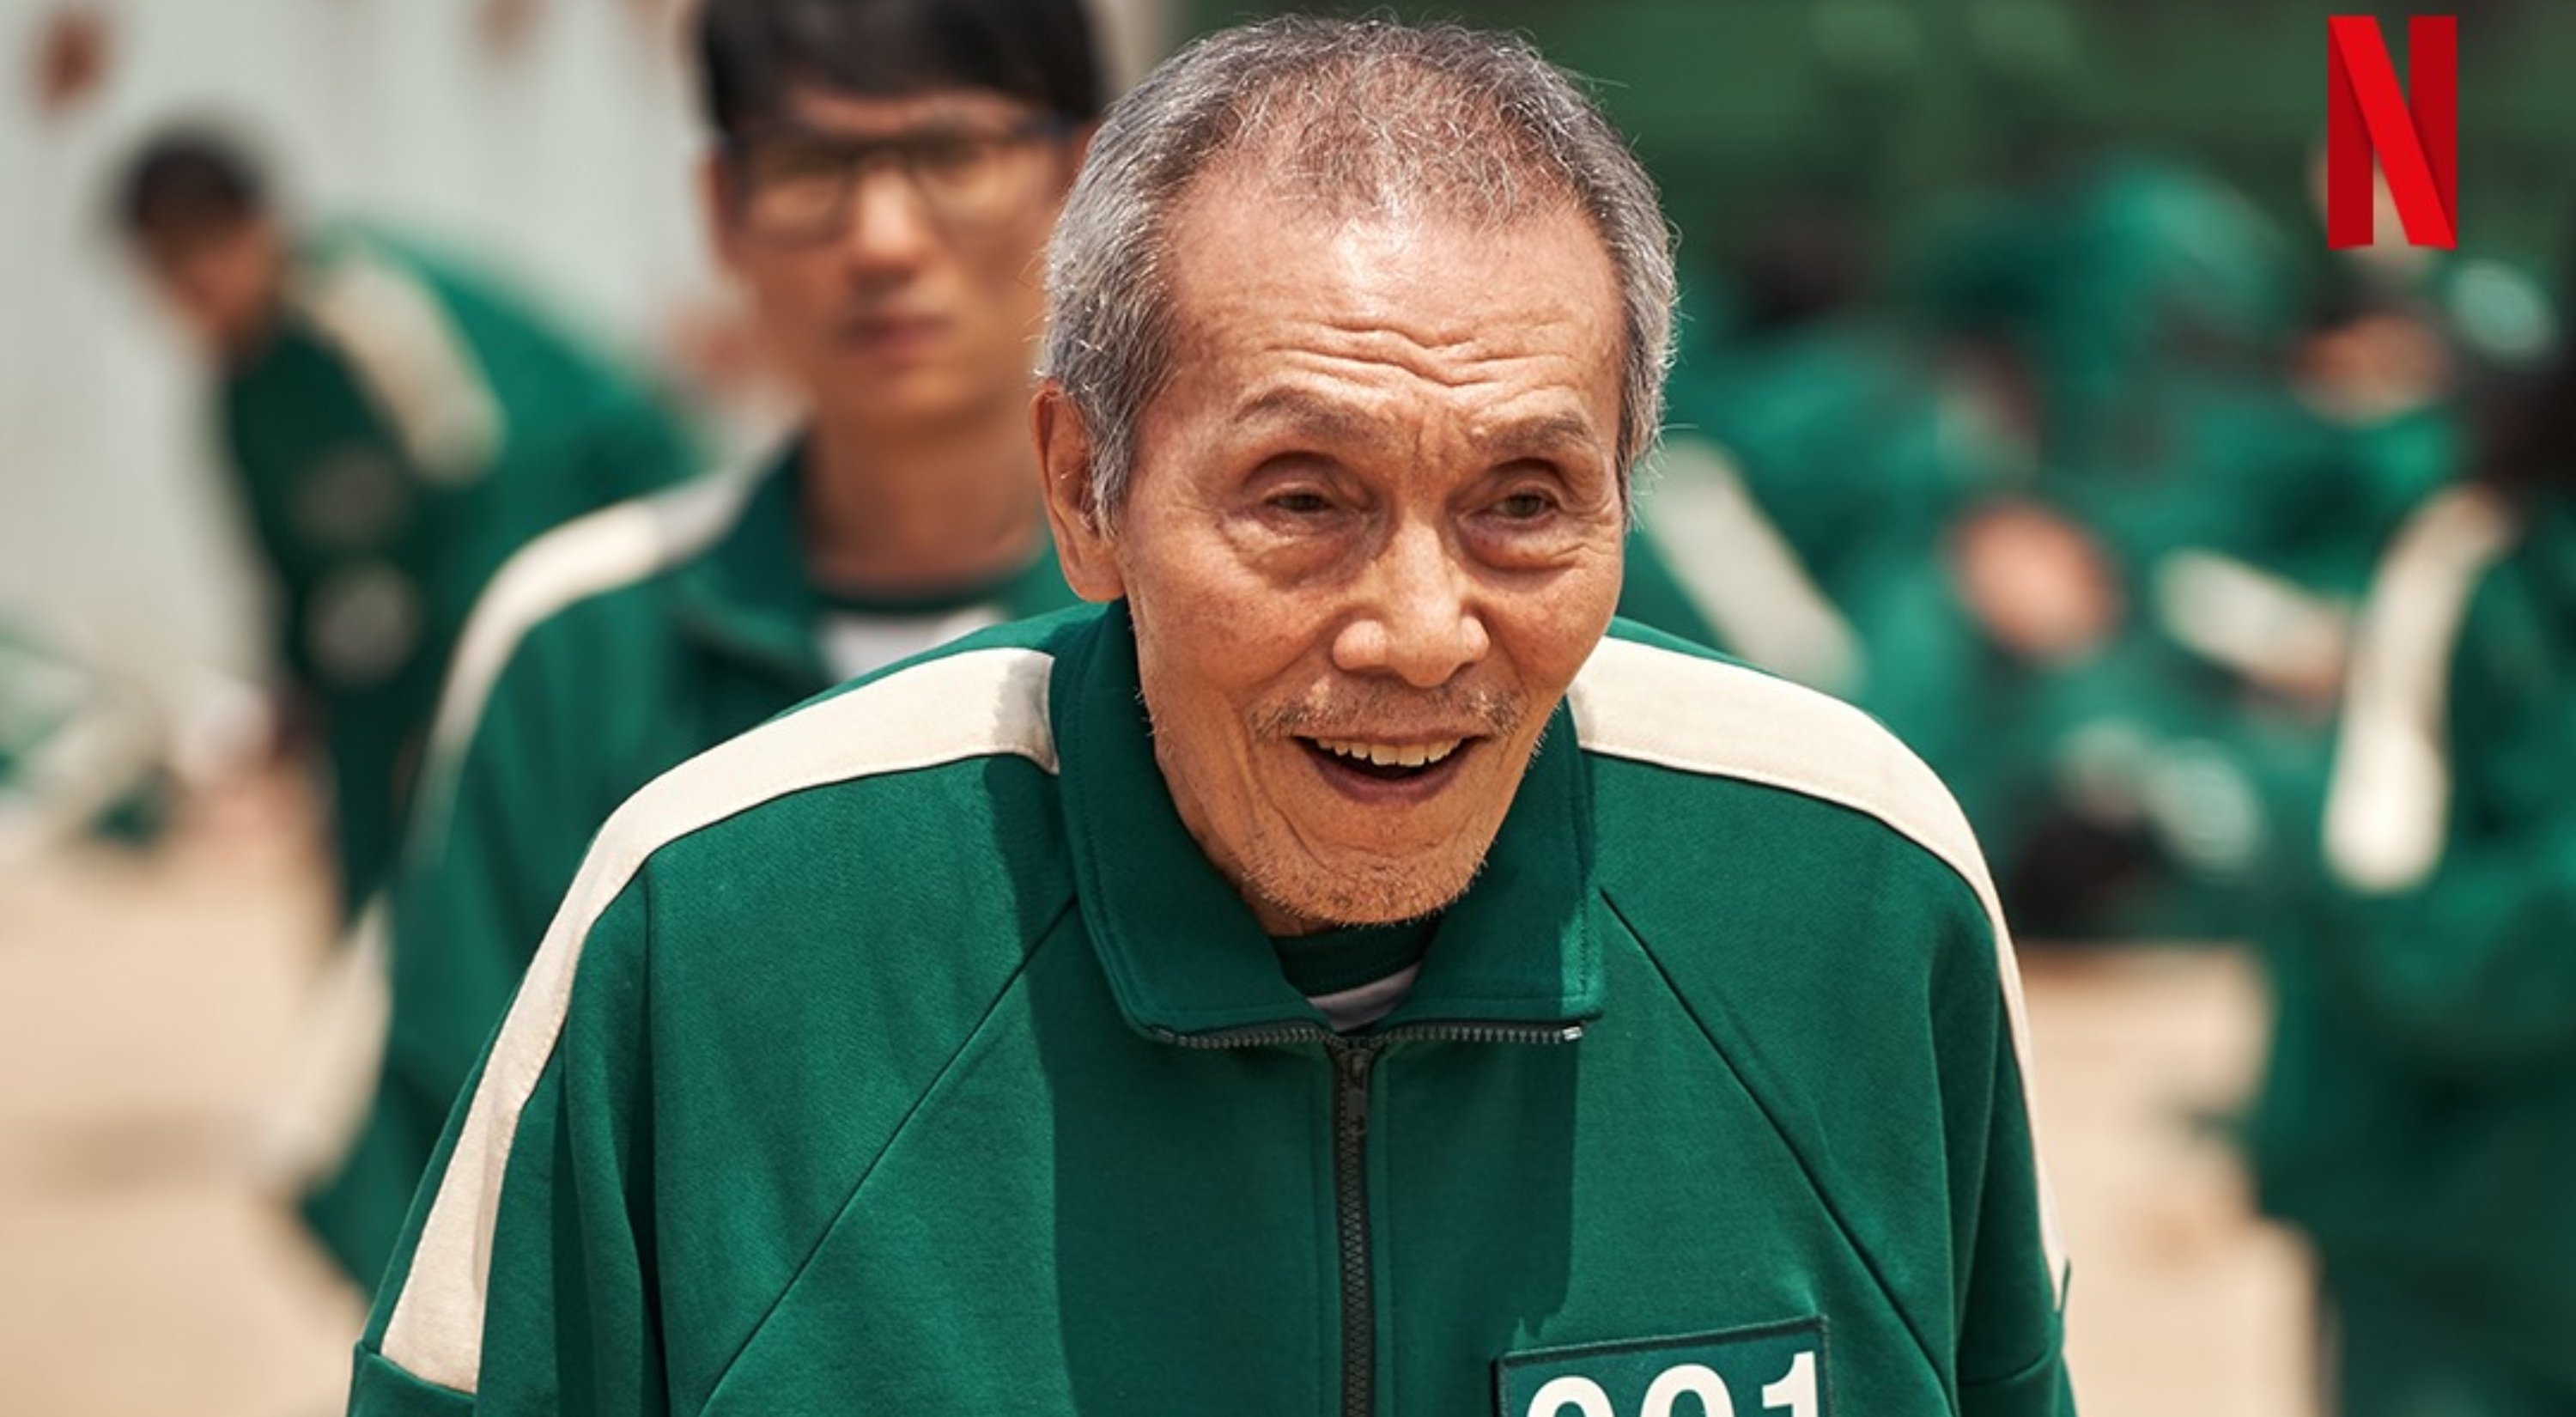 Oh Yeong-Su as Oh Il-Nam in 'Squid Game' on Netflix wearing green tracksuit